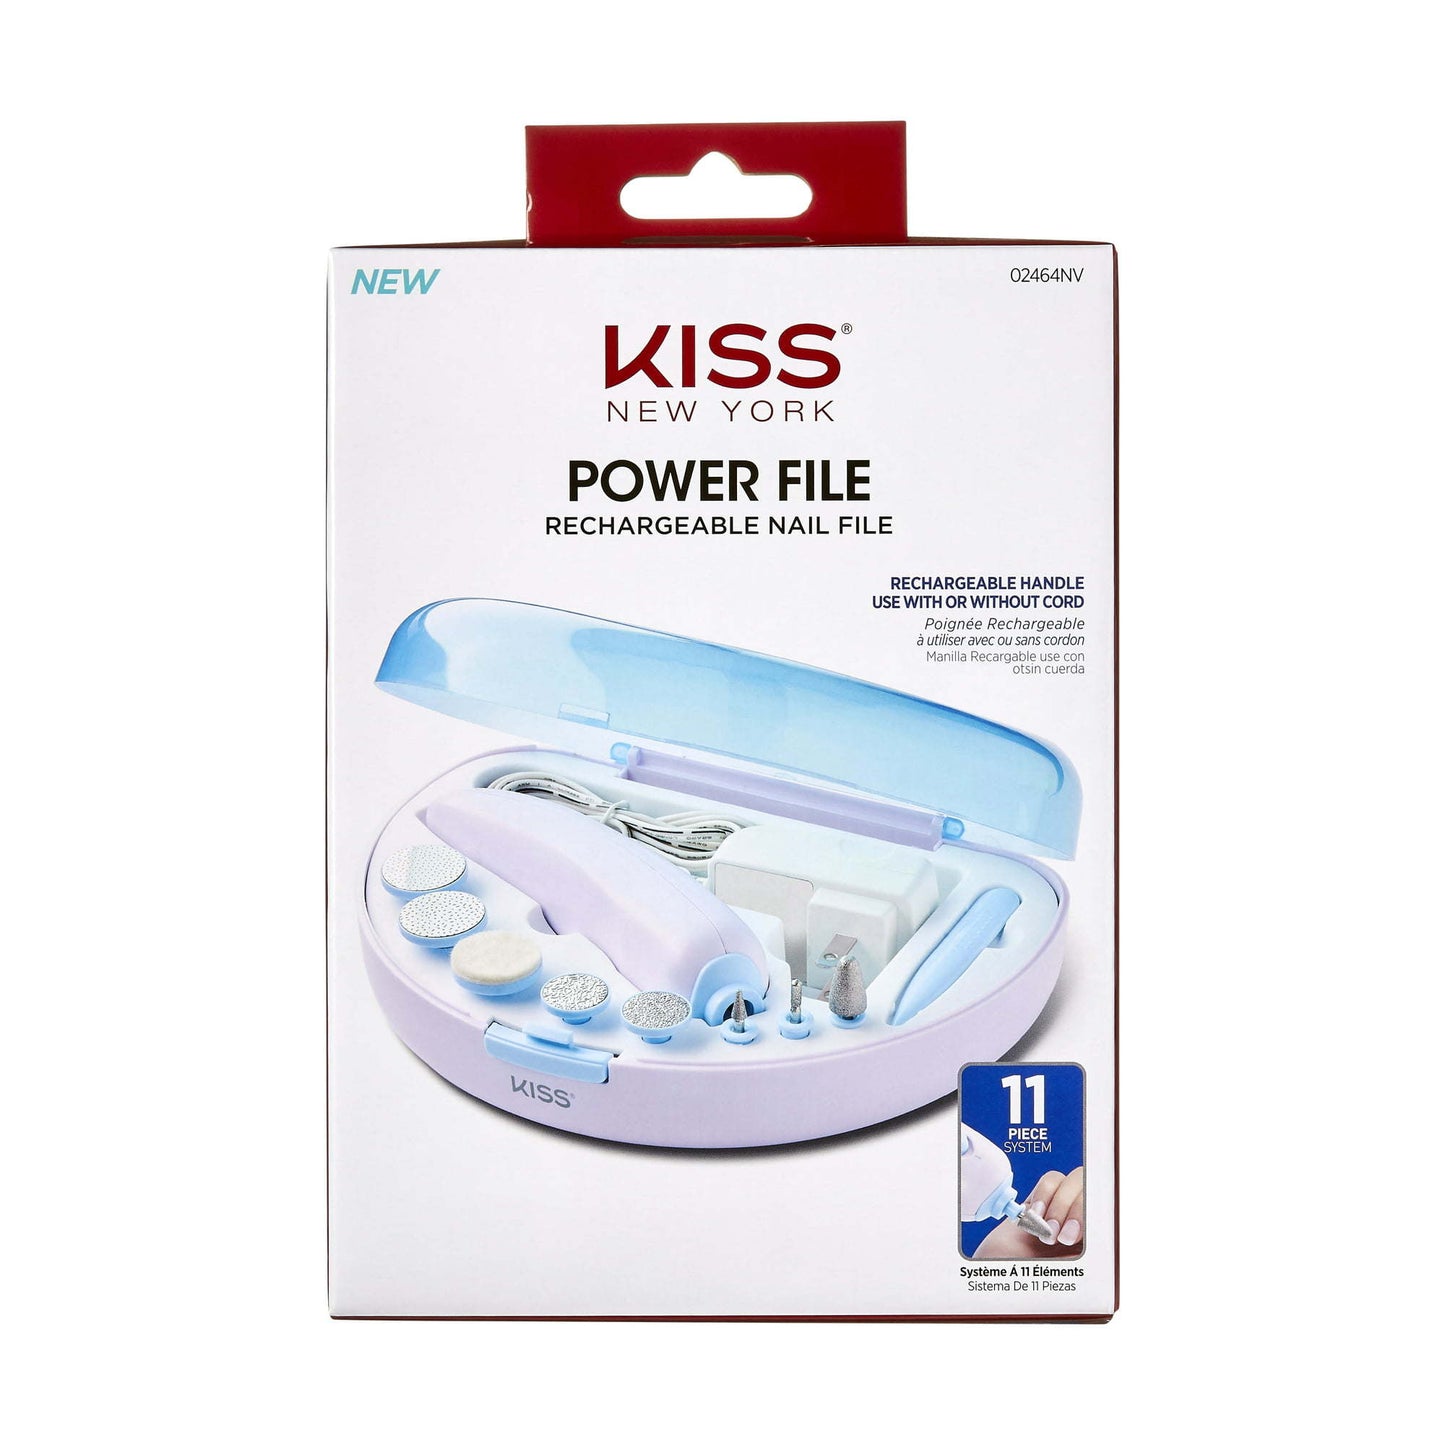 Power File Rechargeable Nail File Kit